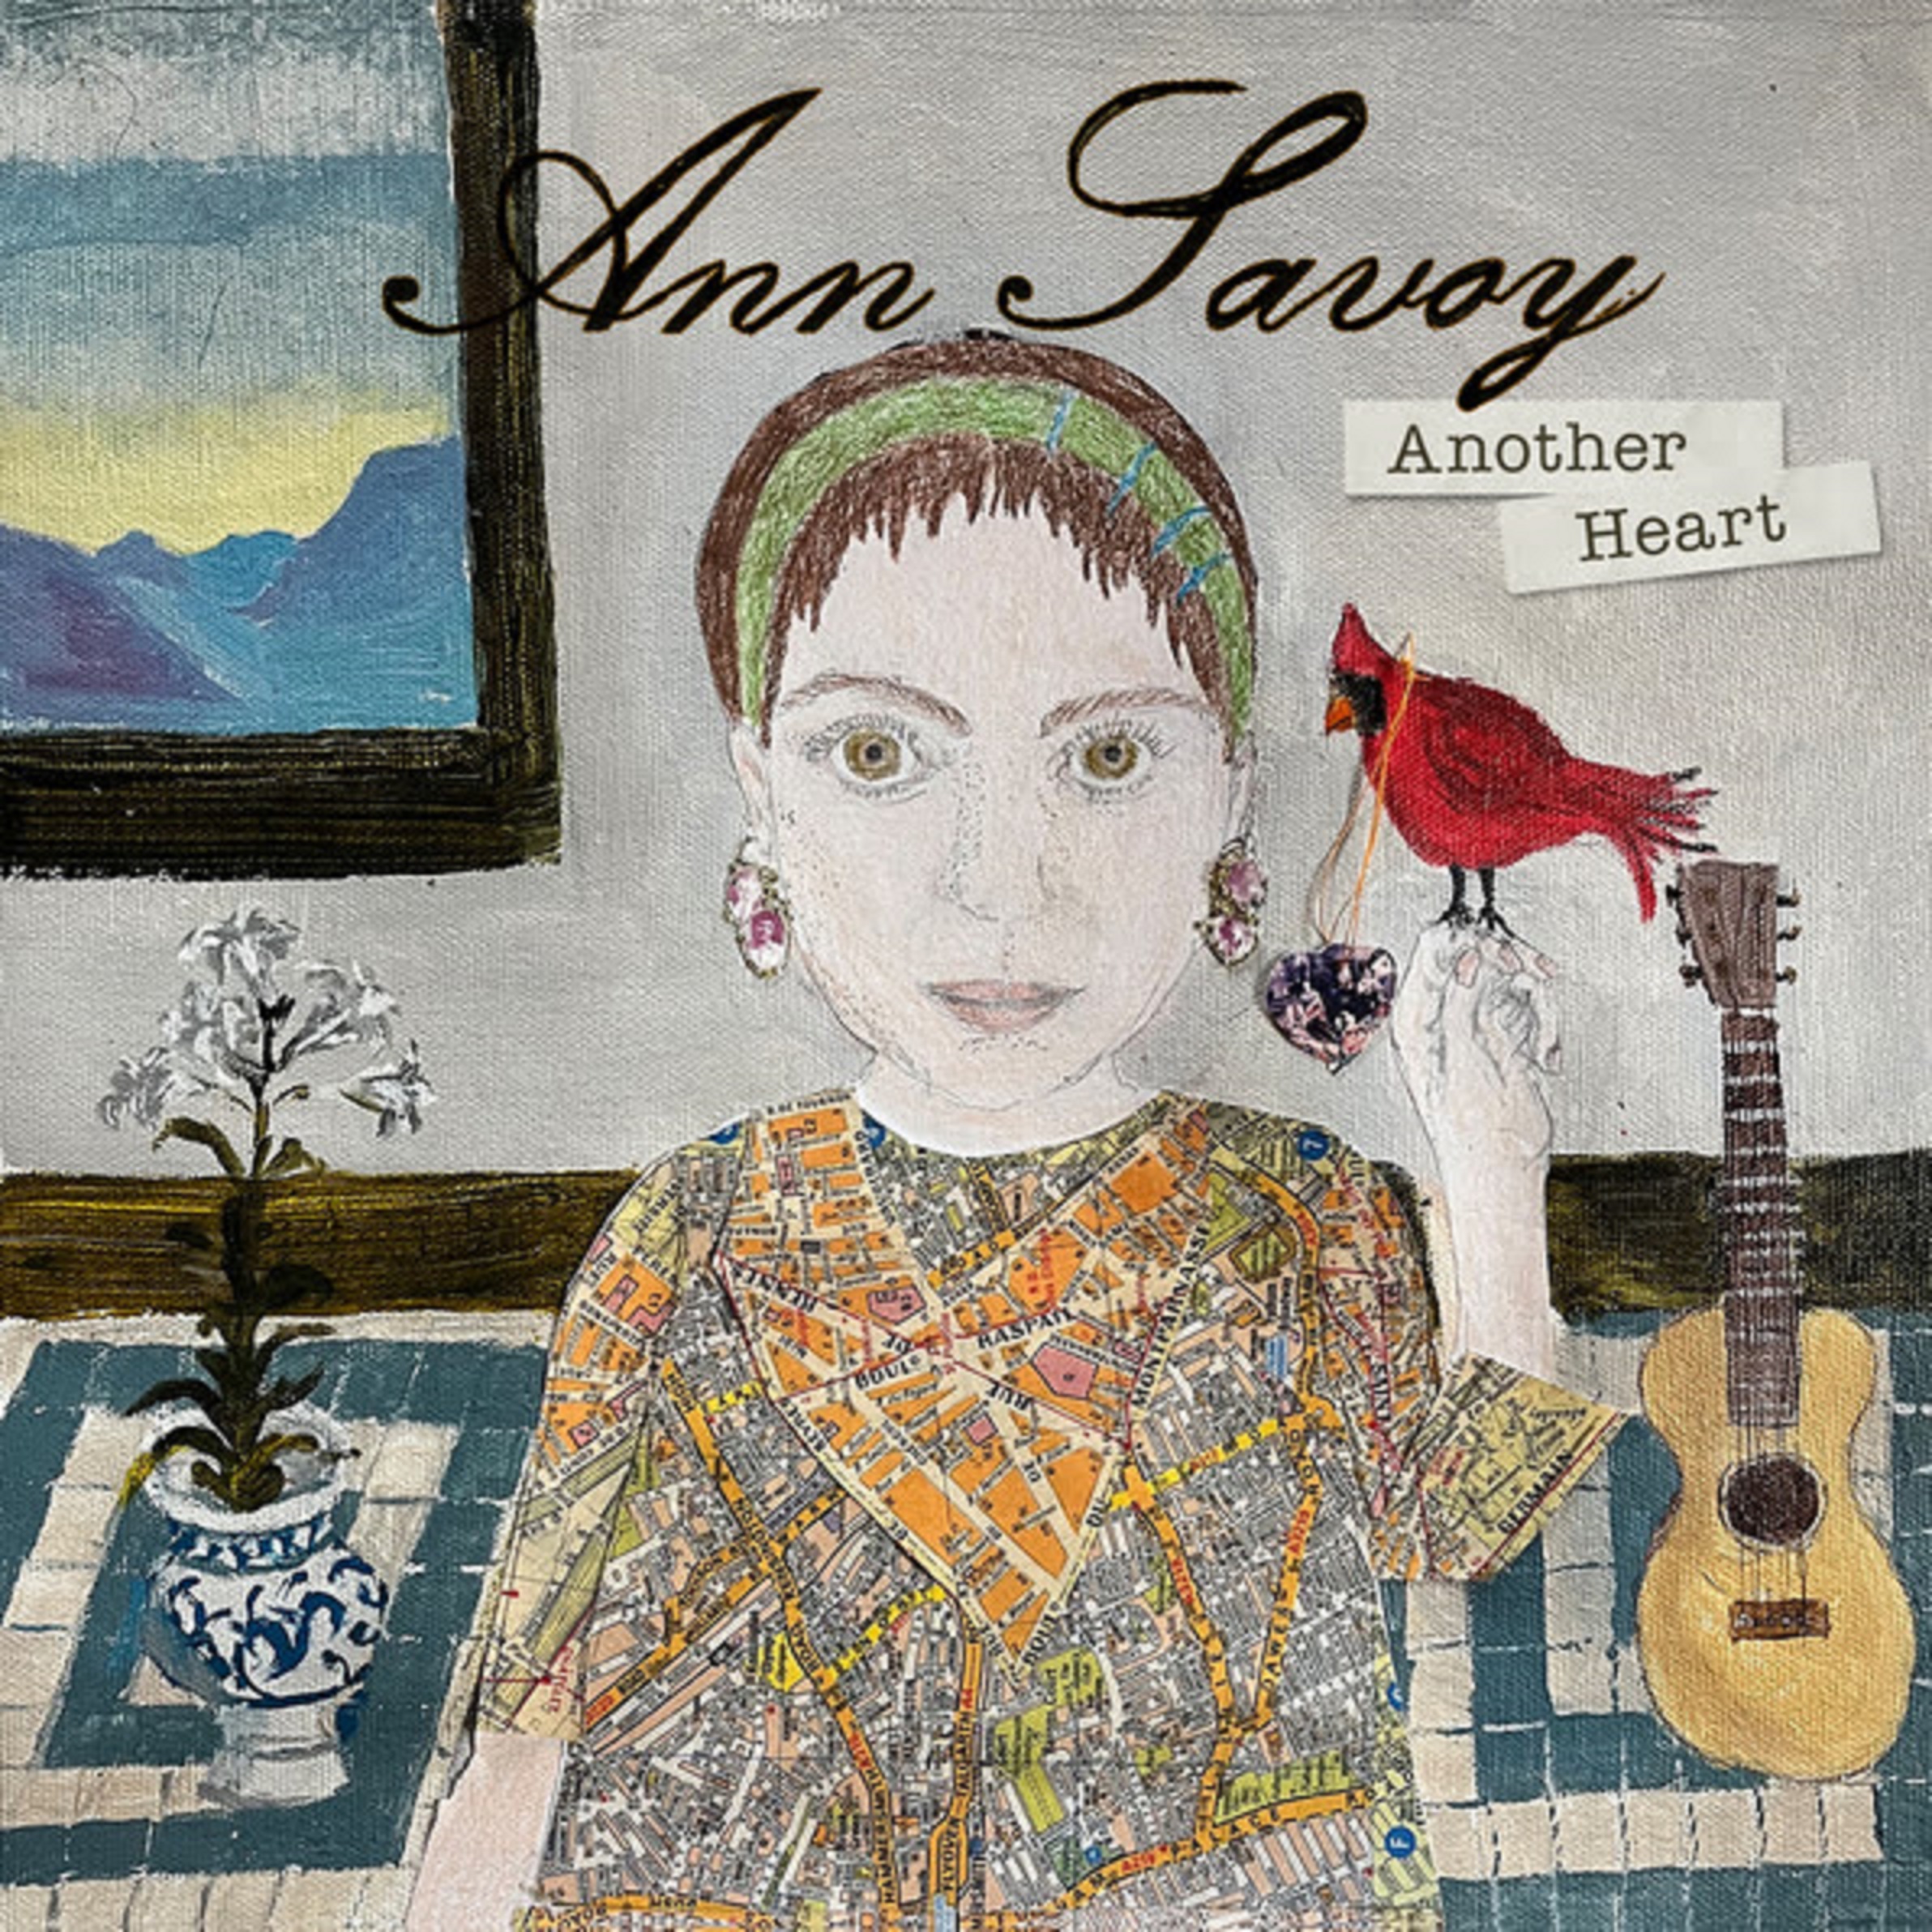 Renowned Cajun Musician Ann Savoy Returns with the Personal and Eclectic ANOTHER HEART, out April 19th